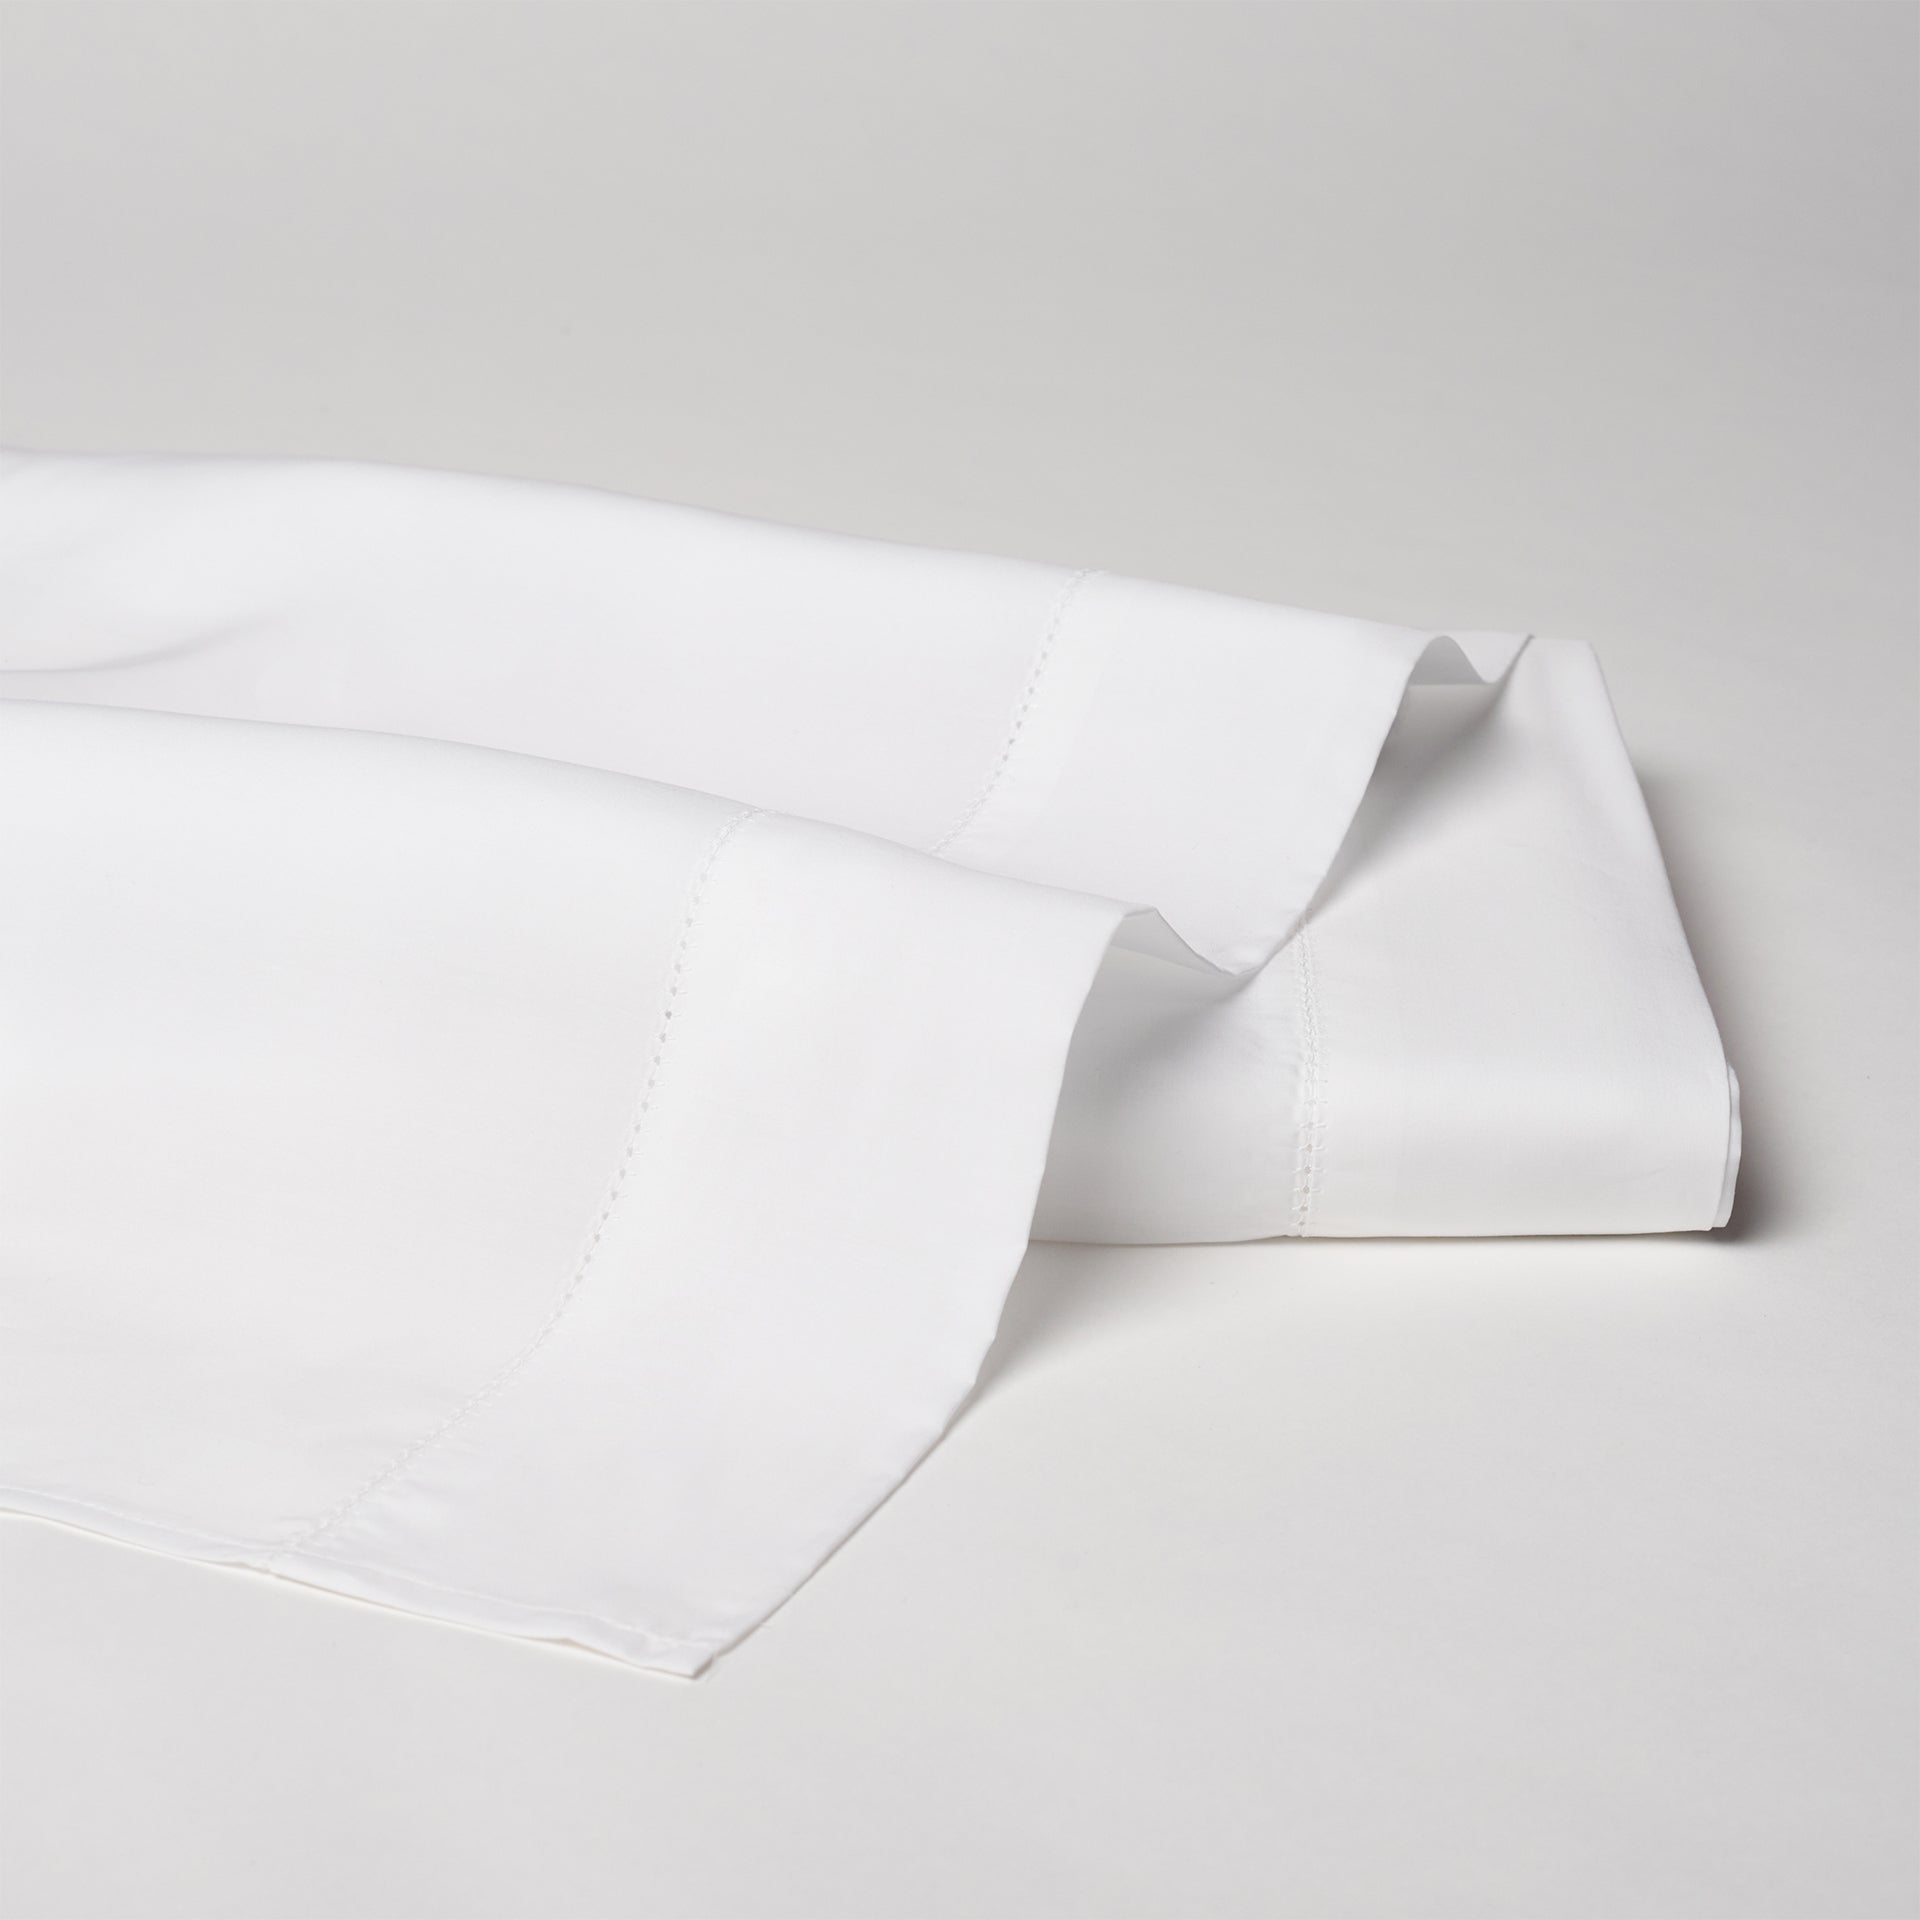 Offered in classic ivory and white, with an attractive hemstitch border on the flat sheets and pillowcases.